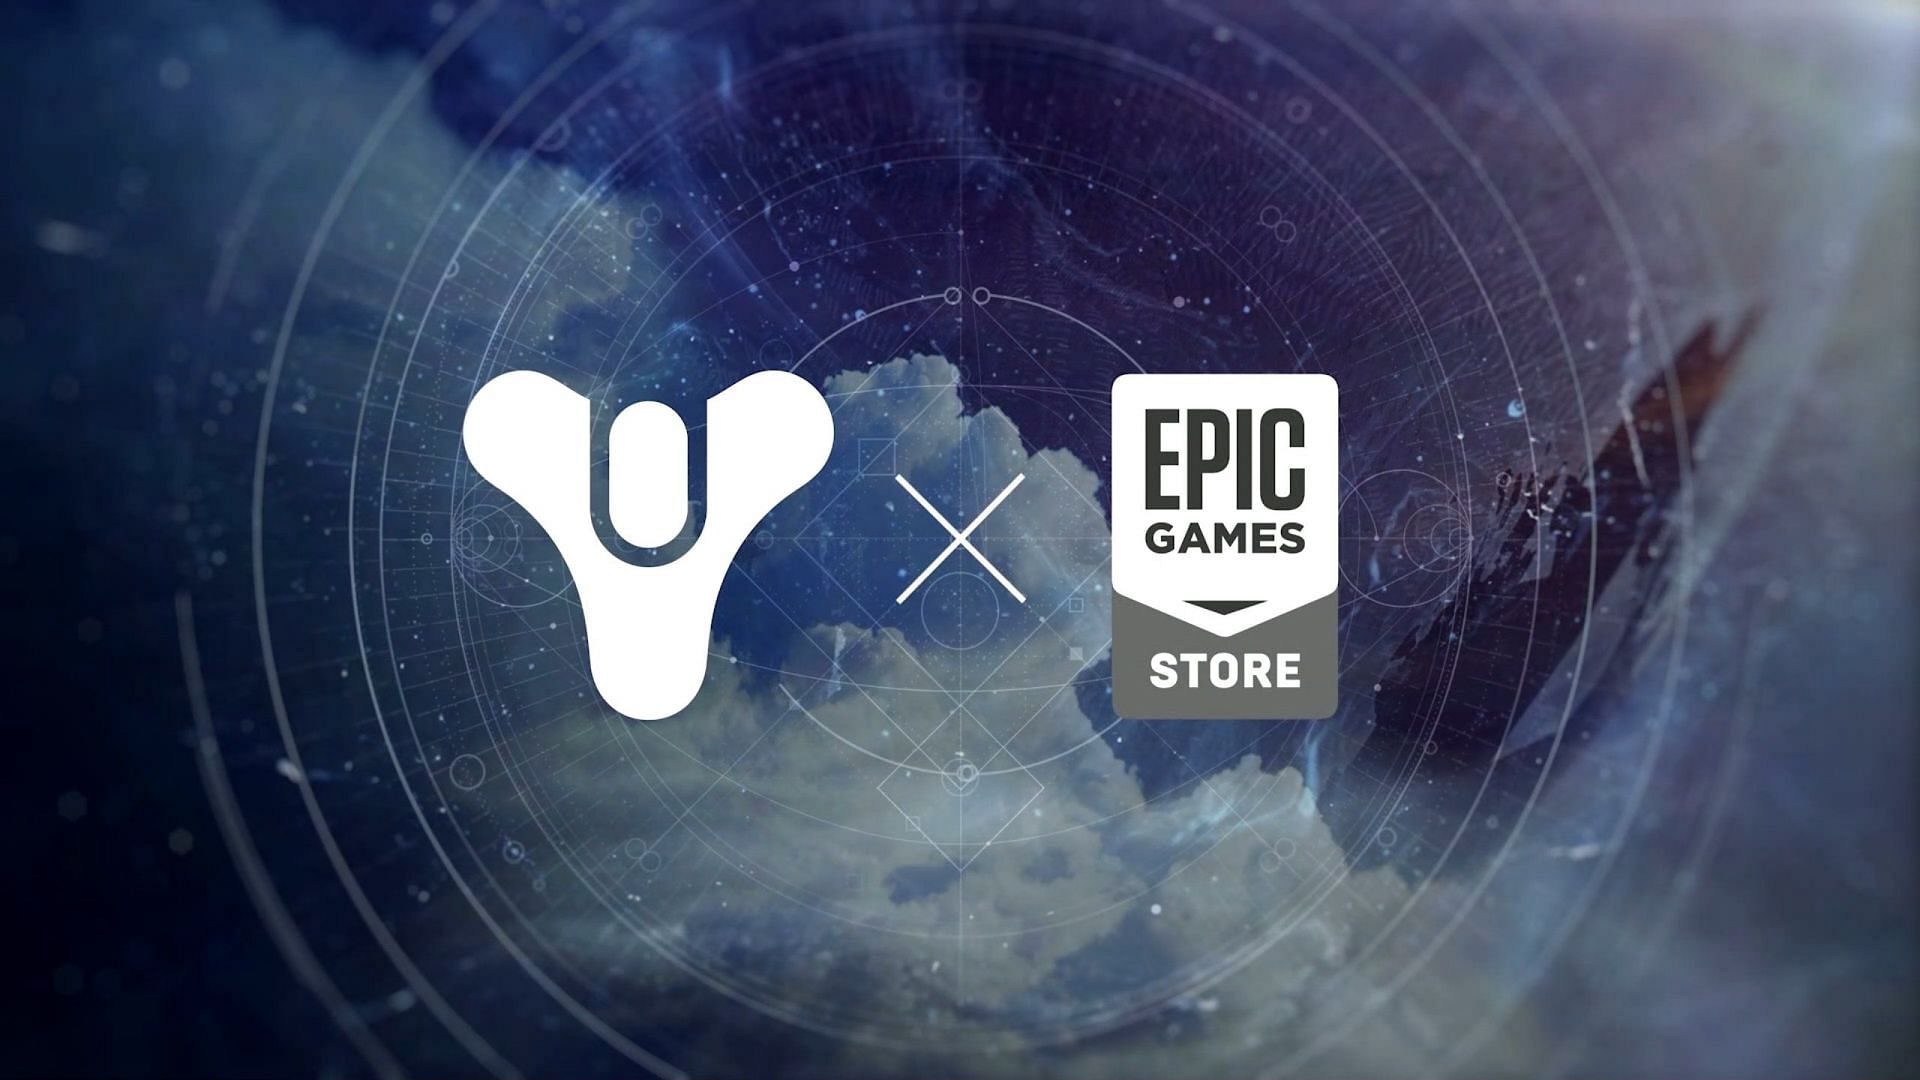 Destiny 2 is coming to the Epic Games Store (Image via Epic Games)